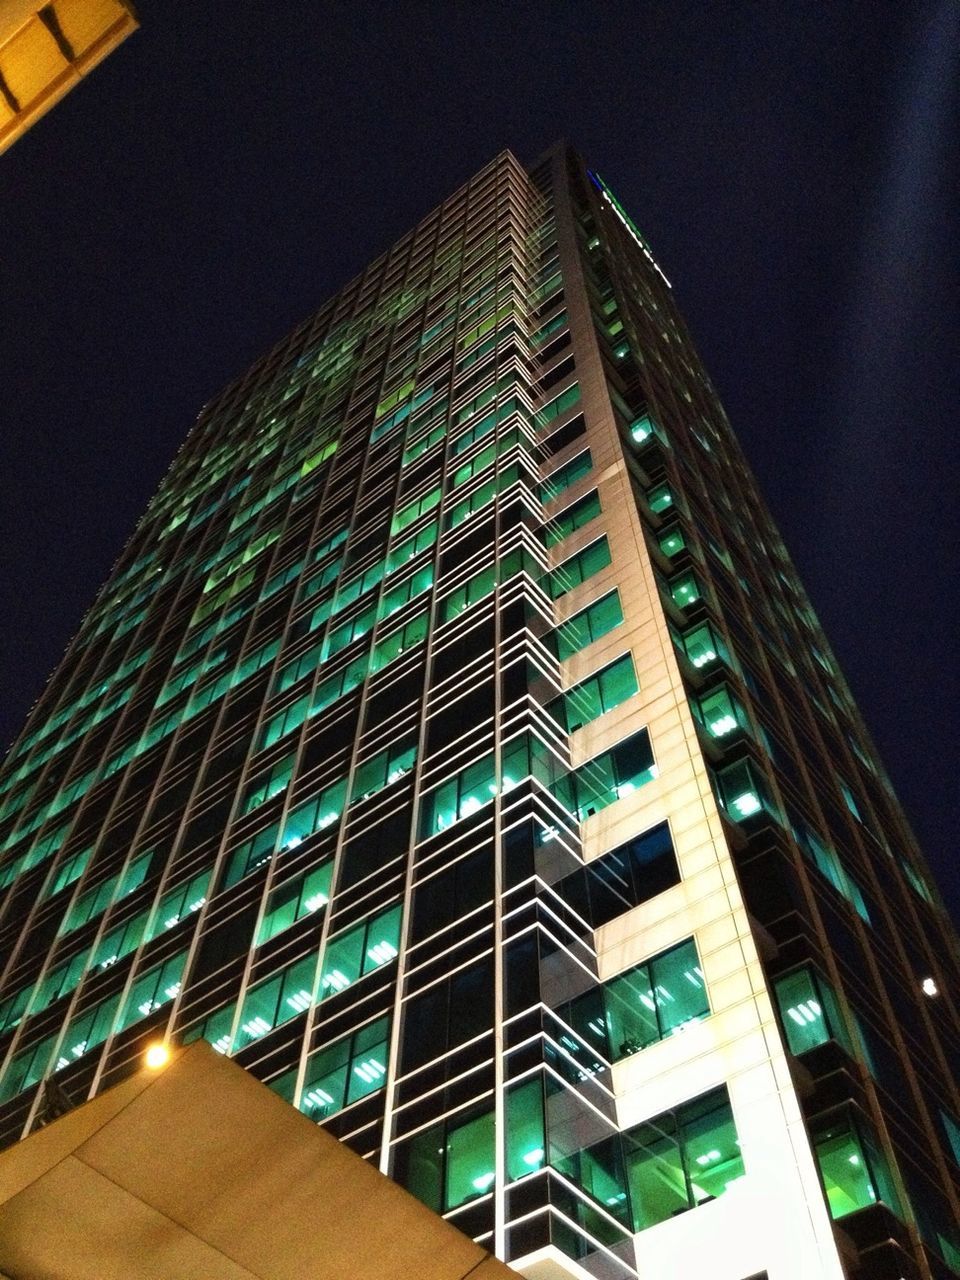 architecture, built structure, building exterior, low angle view, modern, night, city, skyscraper, illuminated, tall - high, office building, tower, building, sky, no people, outdoors, tall, clear sky, capital cities, travel destinations